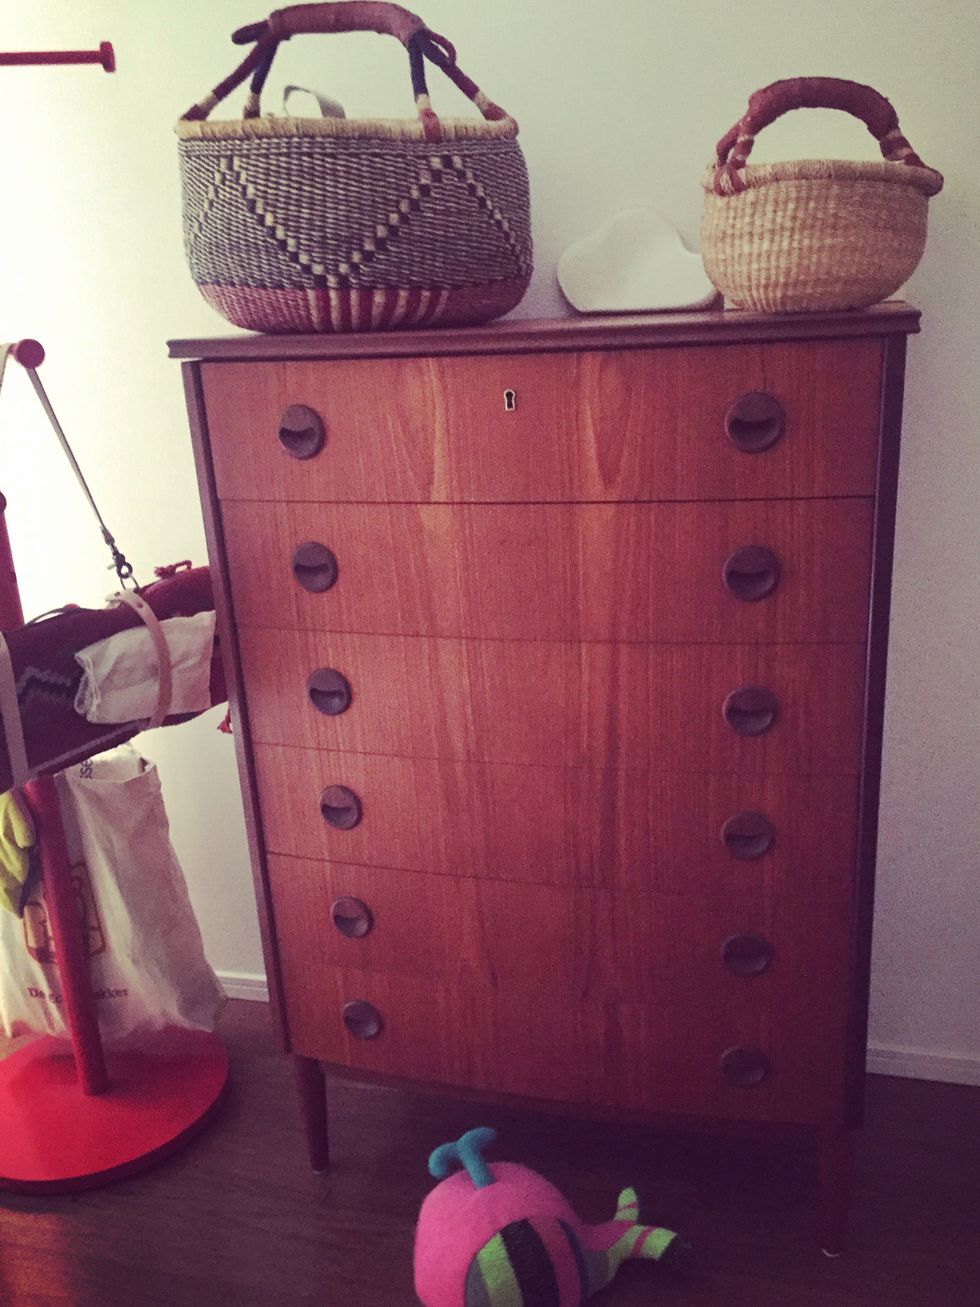 Chest of drawers, Wood, Drawer, Cabinetry, Dresser, Sideboard, Toy, Wicker, Basket, Bag, 